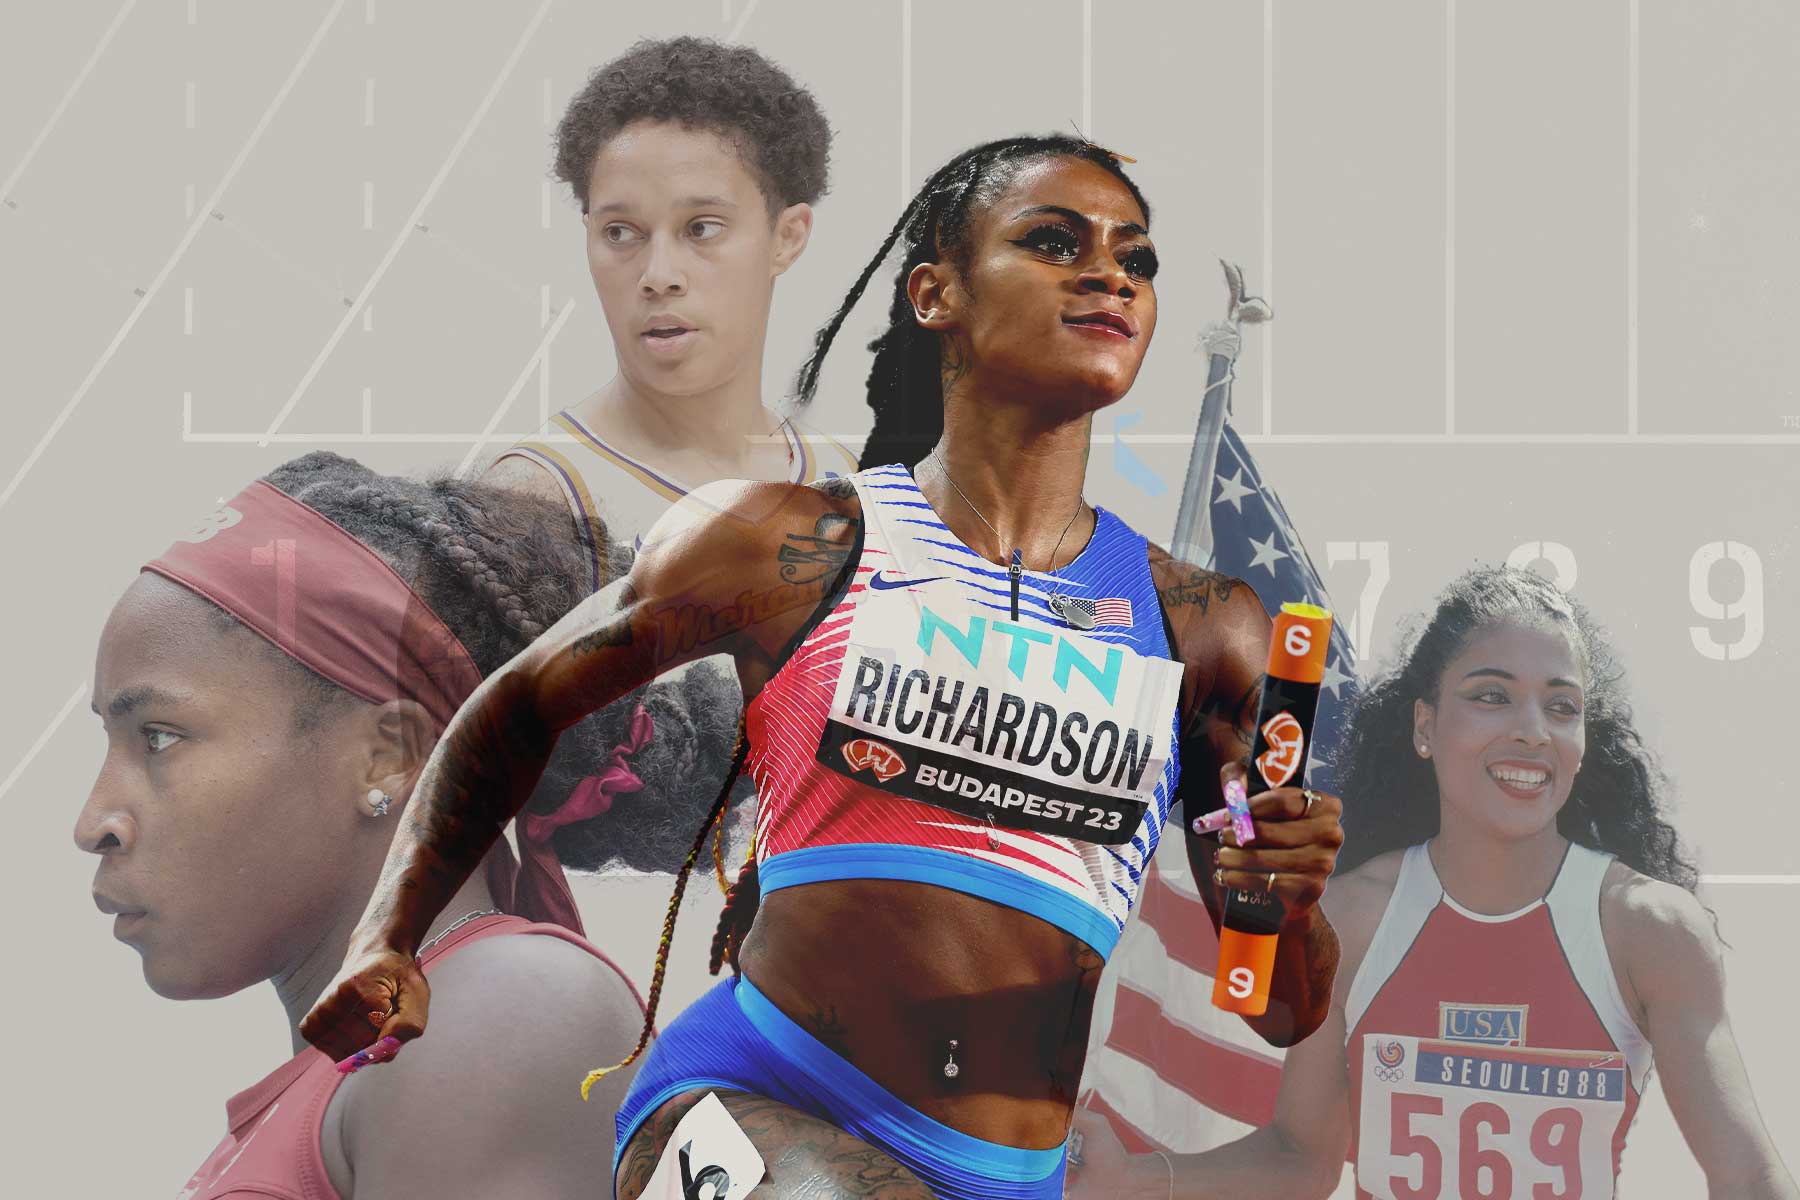 Photo collage of Sha'Carri Richardson featured prominently, with Coco Gauff, Brittney Griner and Florence Griffith Joyner.